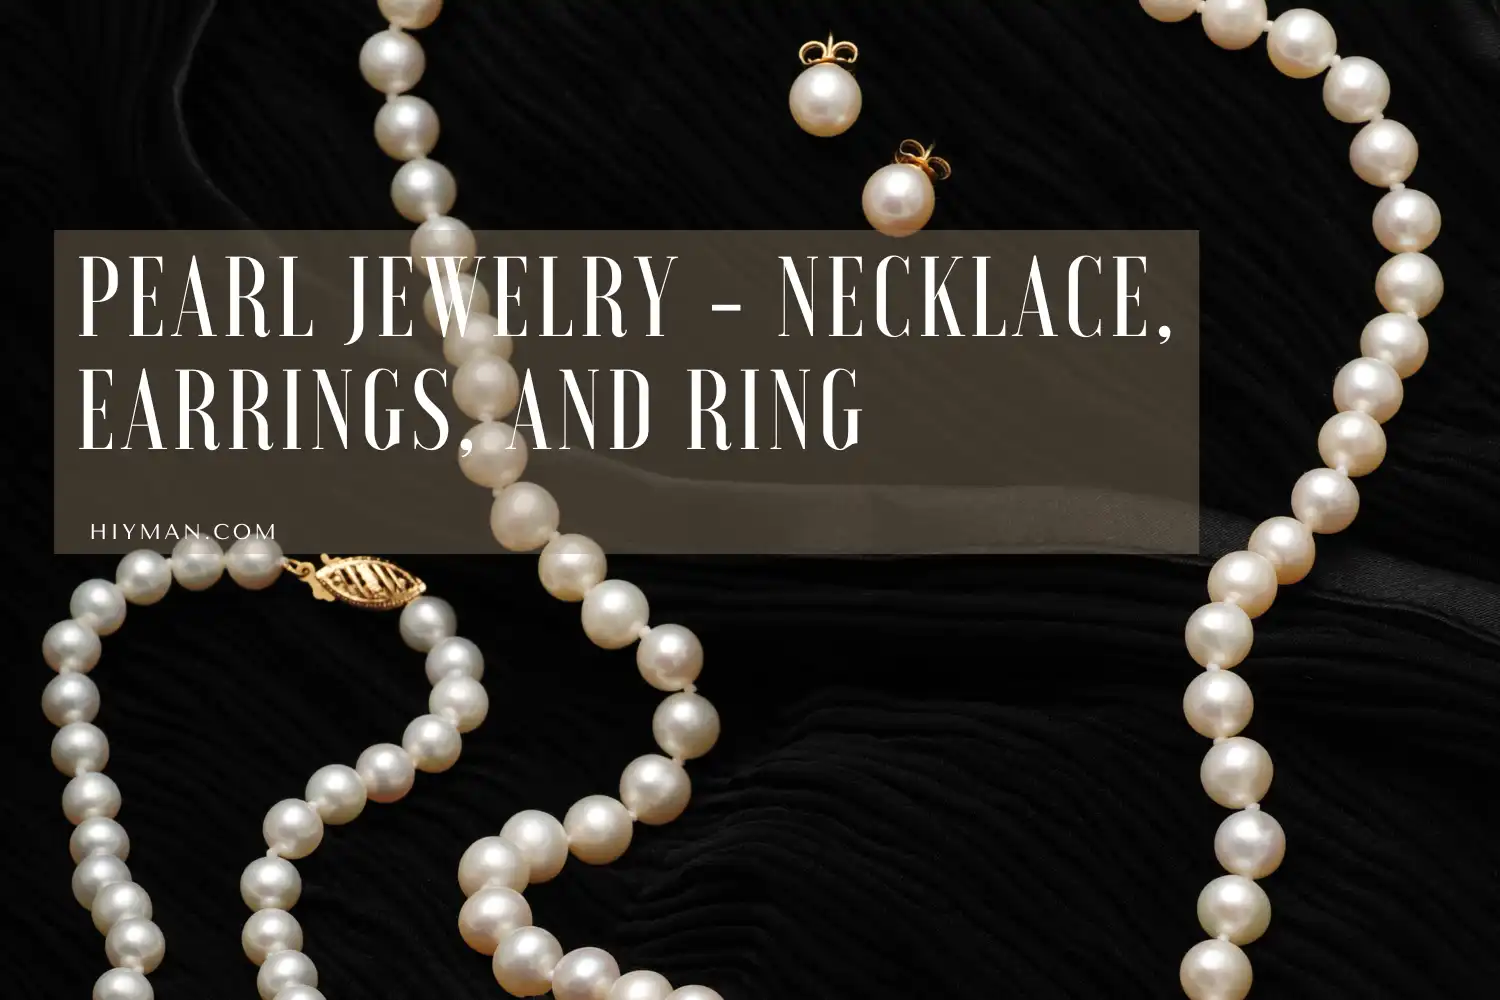 Pearl Jewelry - Necklace, Earrings, and Ring